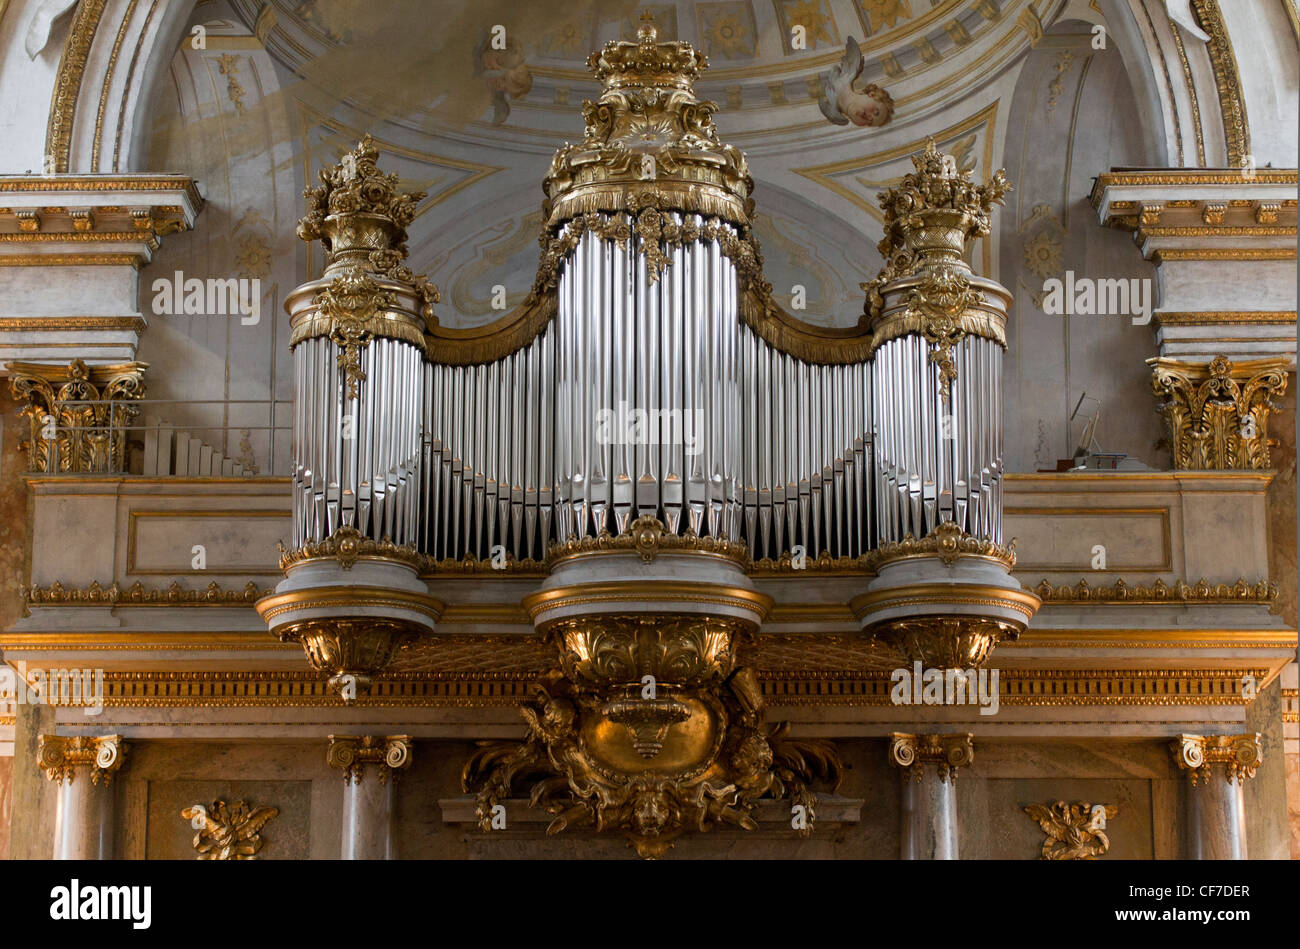 Organ in the chapel of the Royal Palace (Kungliga Slottet) in Stockholm. Stock Photo